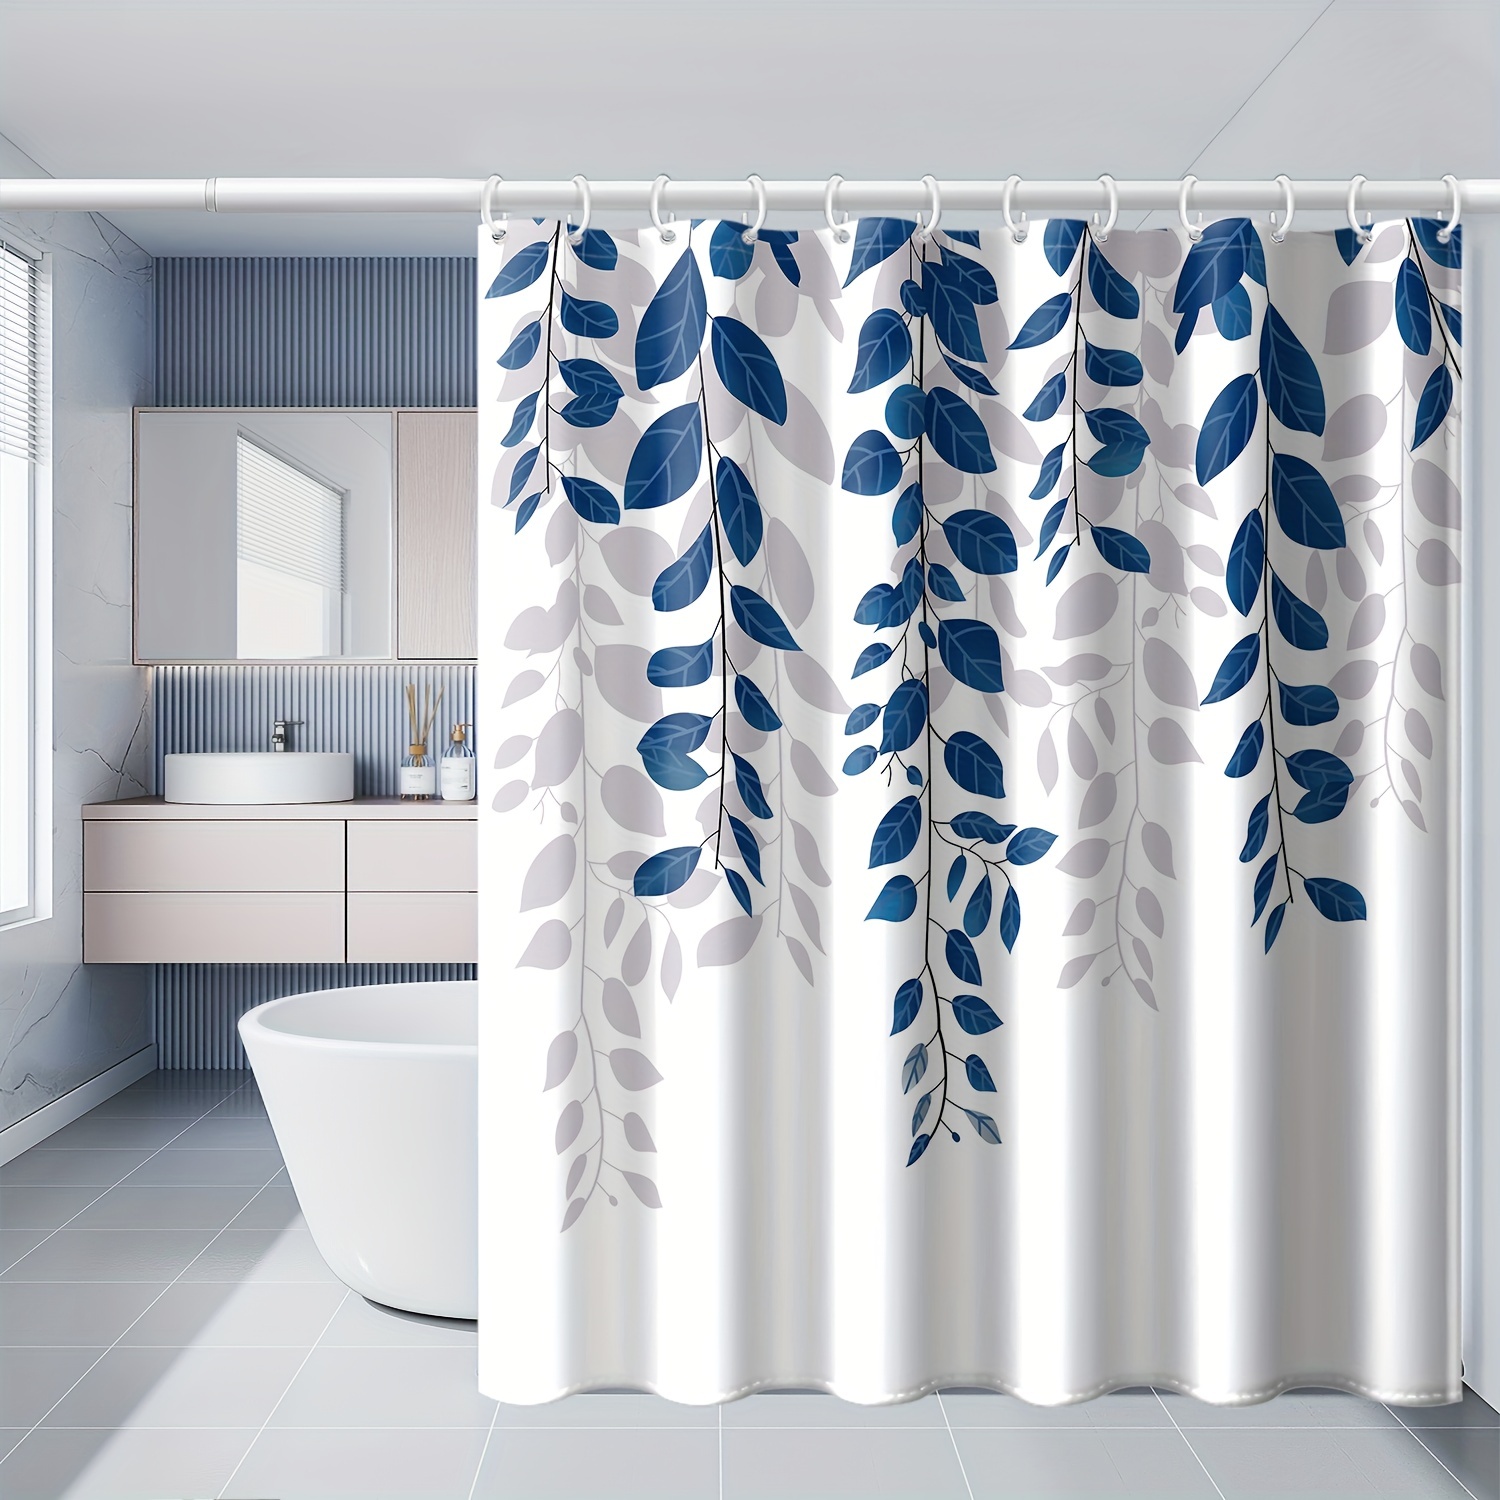 

1pc, Blue Leaves Inverted Pattern Shower Curtain, 180x180cm/71x71 Inch, Botanical Plant Design, Bathroom Window Decor With Plastic Hooks, Waterproof, Machine Washable, Suitable For Home & Hotel Rooms